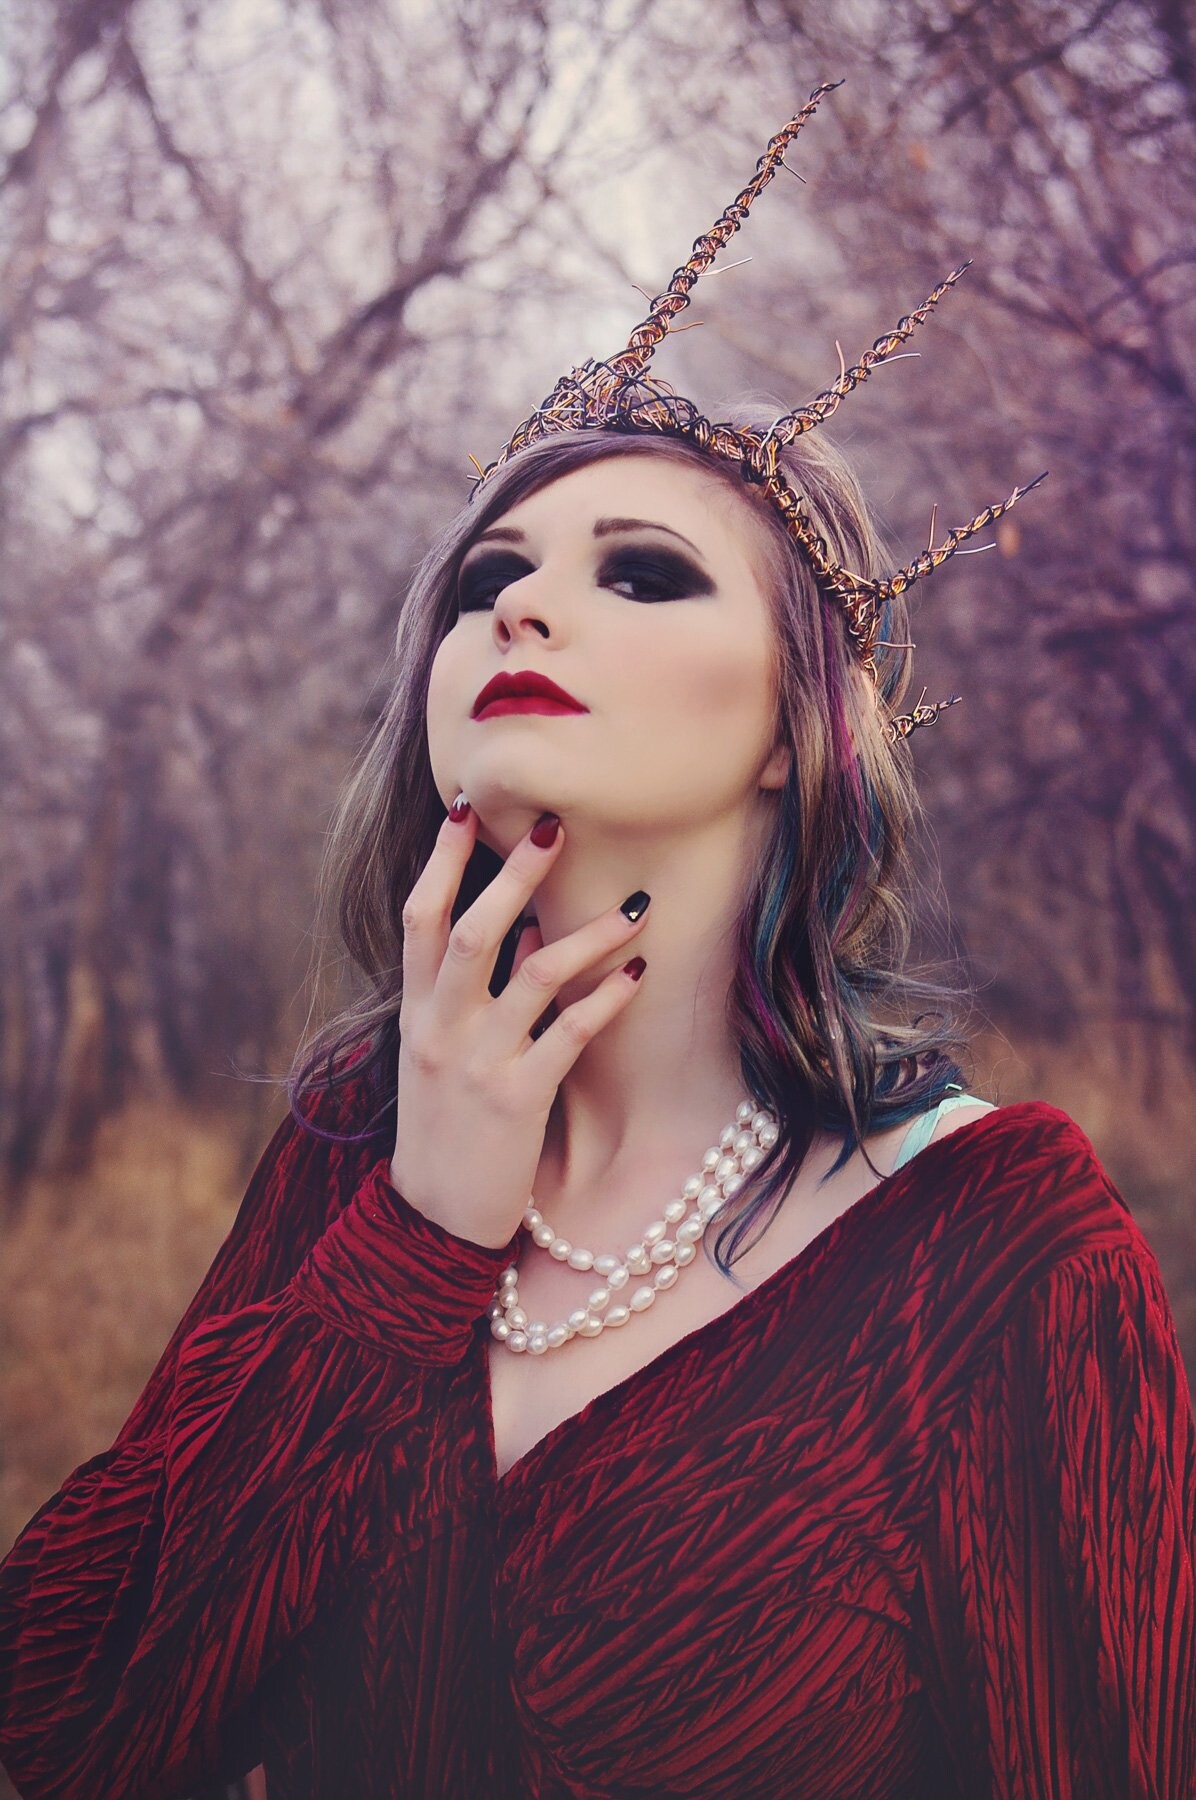 This photo was taken on a very cold day in Saskatoon, SK. There is a beautiful grove of trees that looks as though it's straight from a storybook; it was the perfect location for an 'Evil Queen' photo shoot. The crown was handmade using multiple lengths of 16g wire. <br />
Model: Julia Kurylyk from Infinity Models Saskatoon<br />
Hair and Makeup Artist: Kiana Johnstone<br />
Photography and Styling: Amanda Adam<br />
Crown: Jon Hardybala